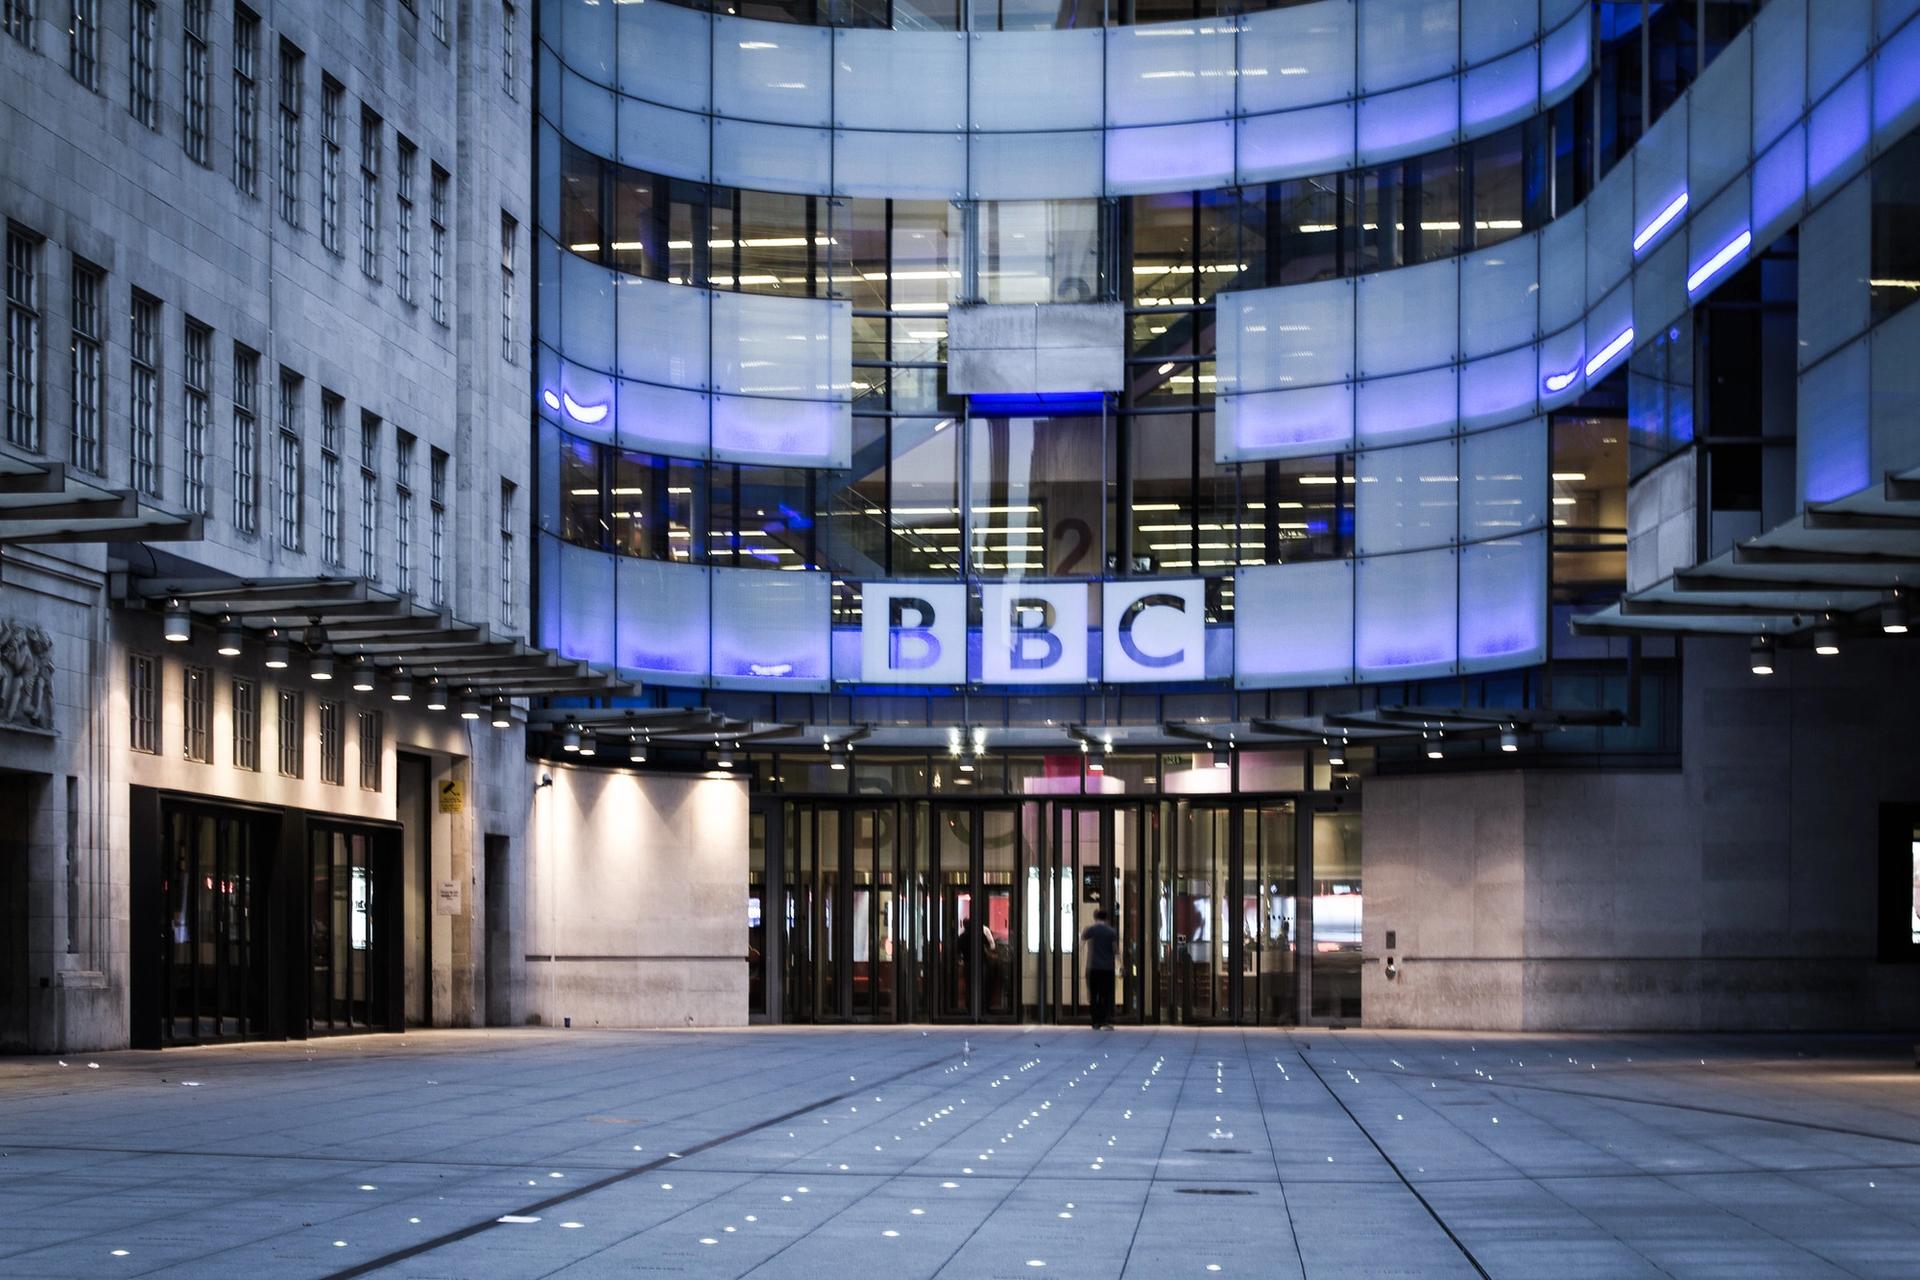 Broadcasting House, the headquarters of the BBC, in Portland Place and Langham Place, London. Photo: Alexander Svensson